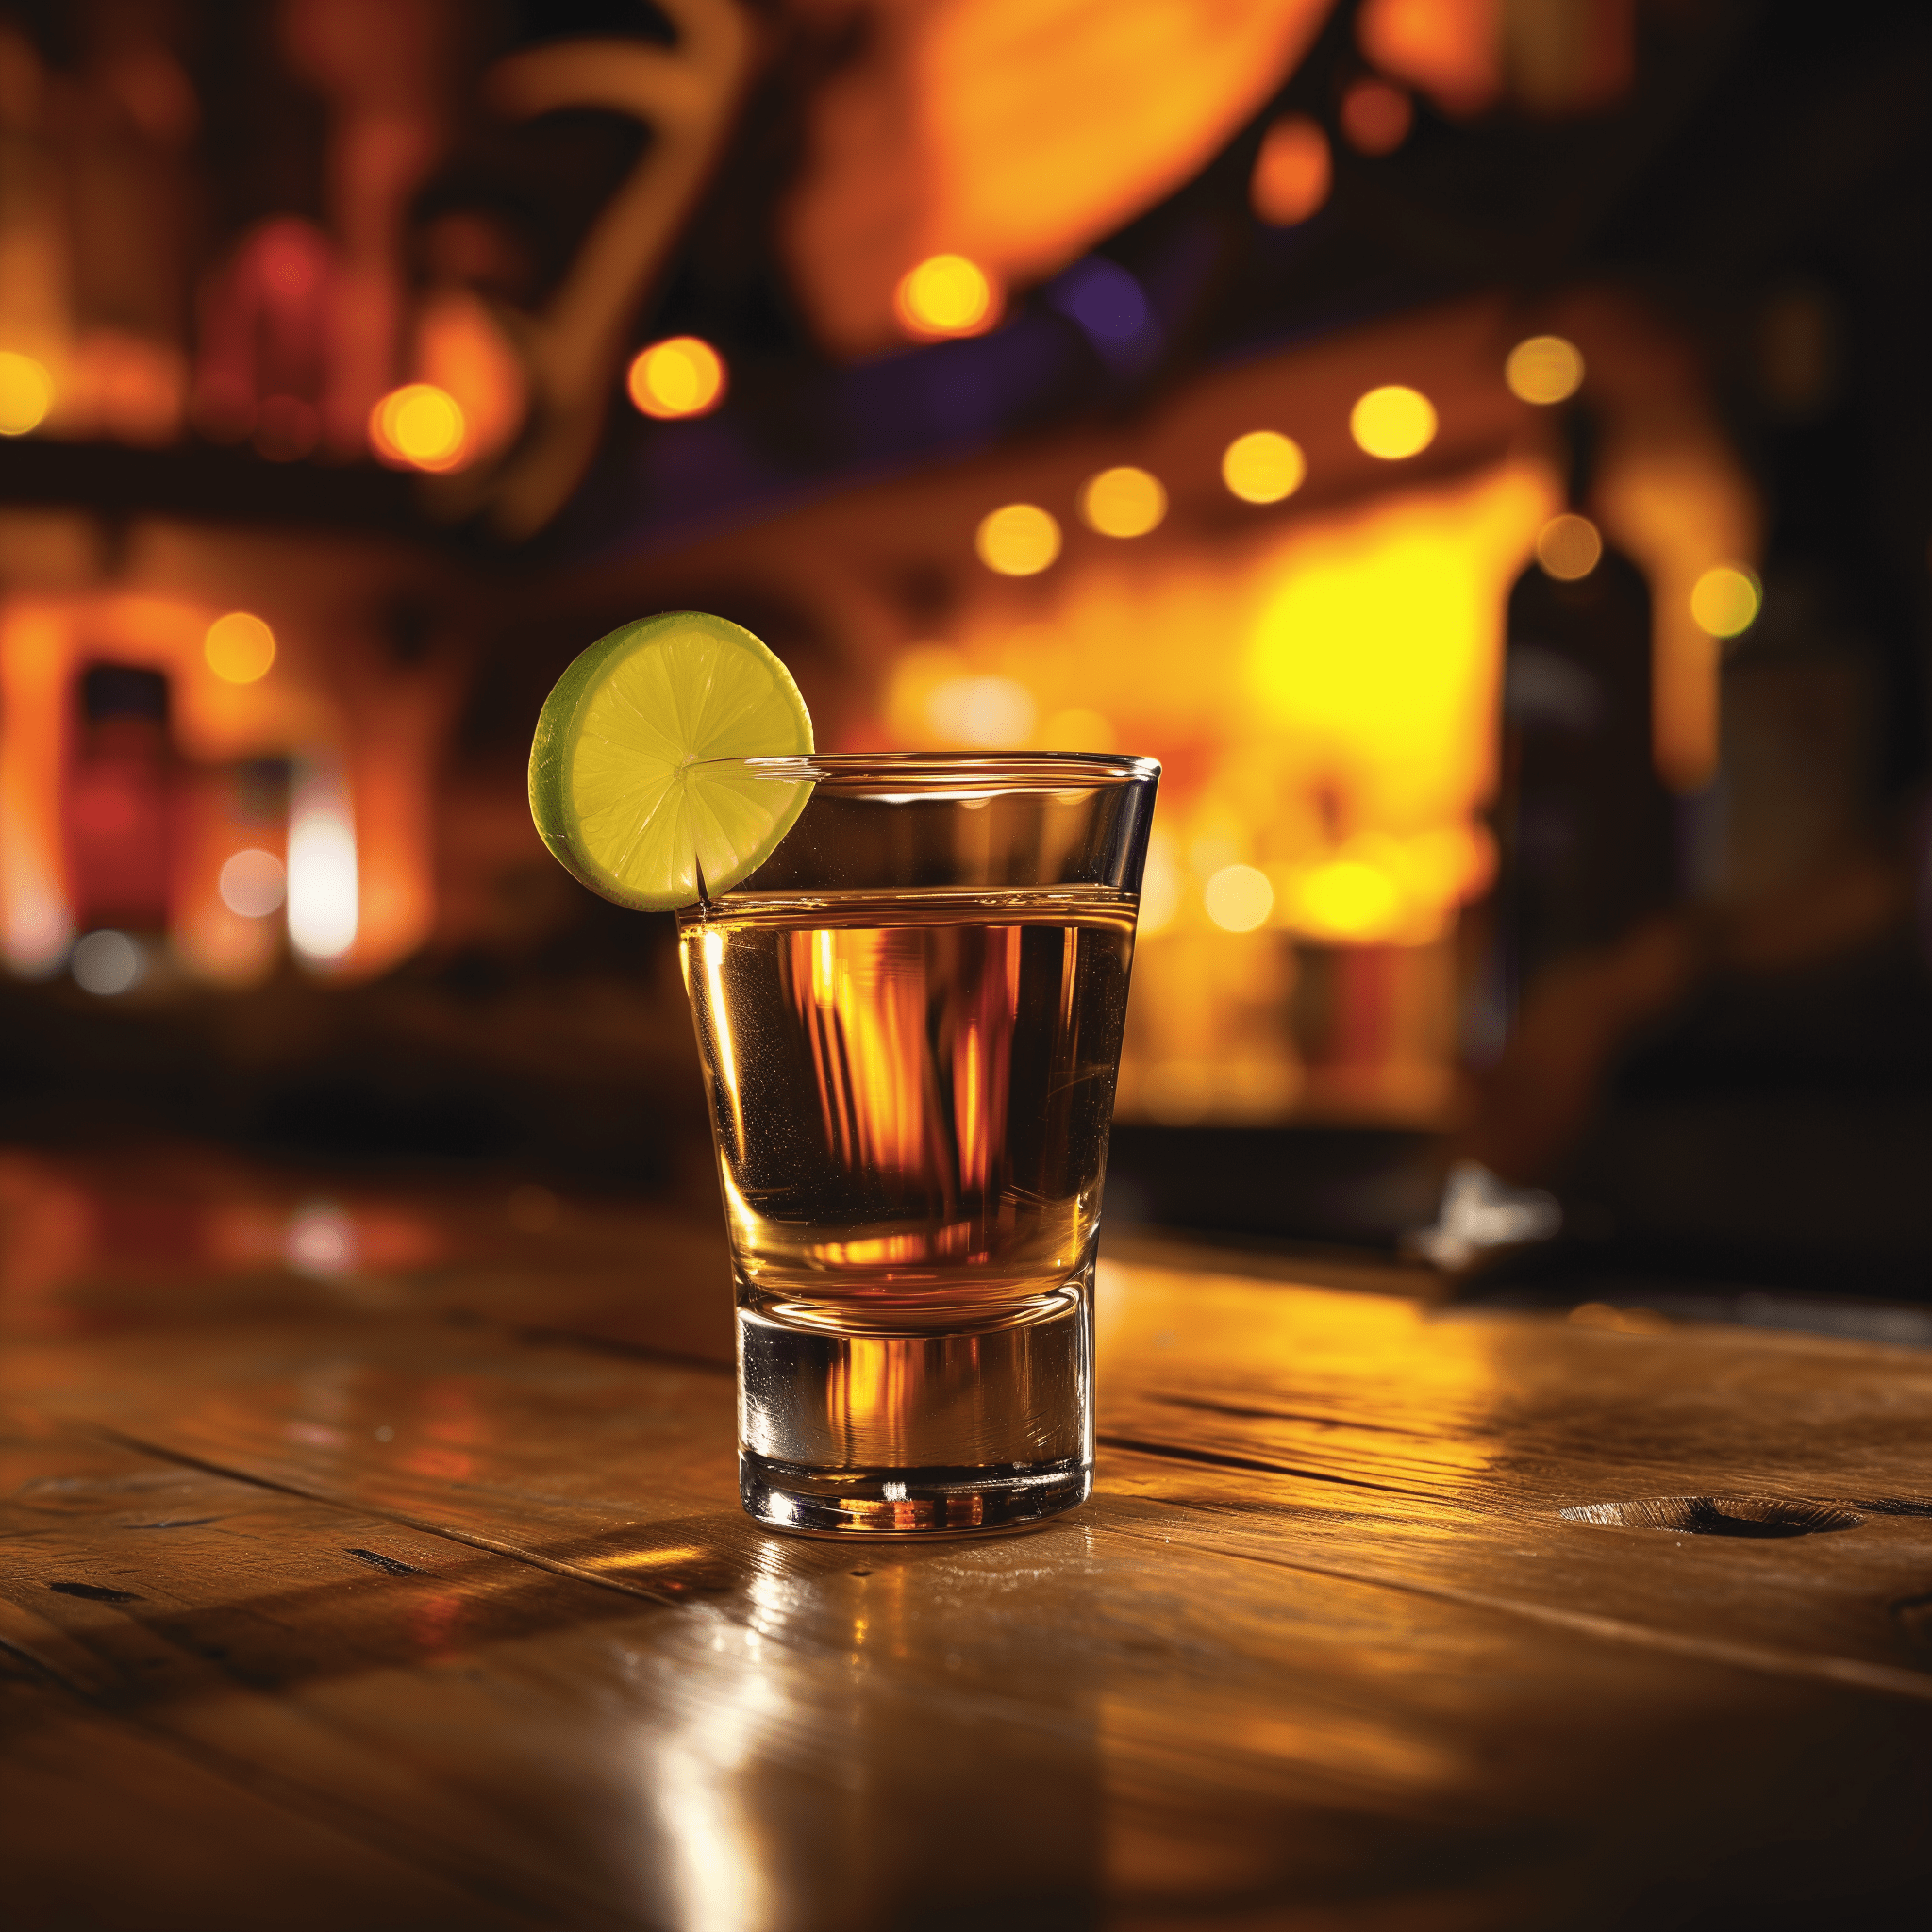 Rocky Mountain Recipe - The Rocky Mountain shot offers a smooth, sweet flavor with a zesty citrus kick from the lime juice. The Southern Comfort provides a whiskey-like warmth, while the amaretto adds a hint of almond and richness.